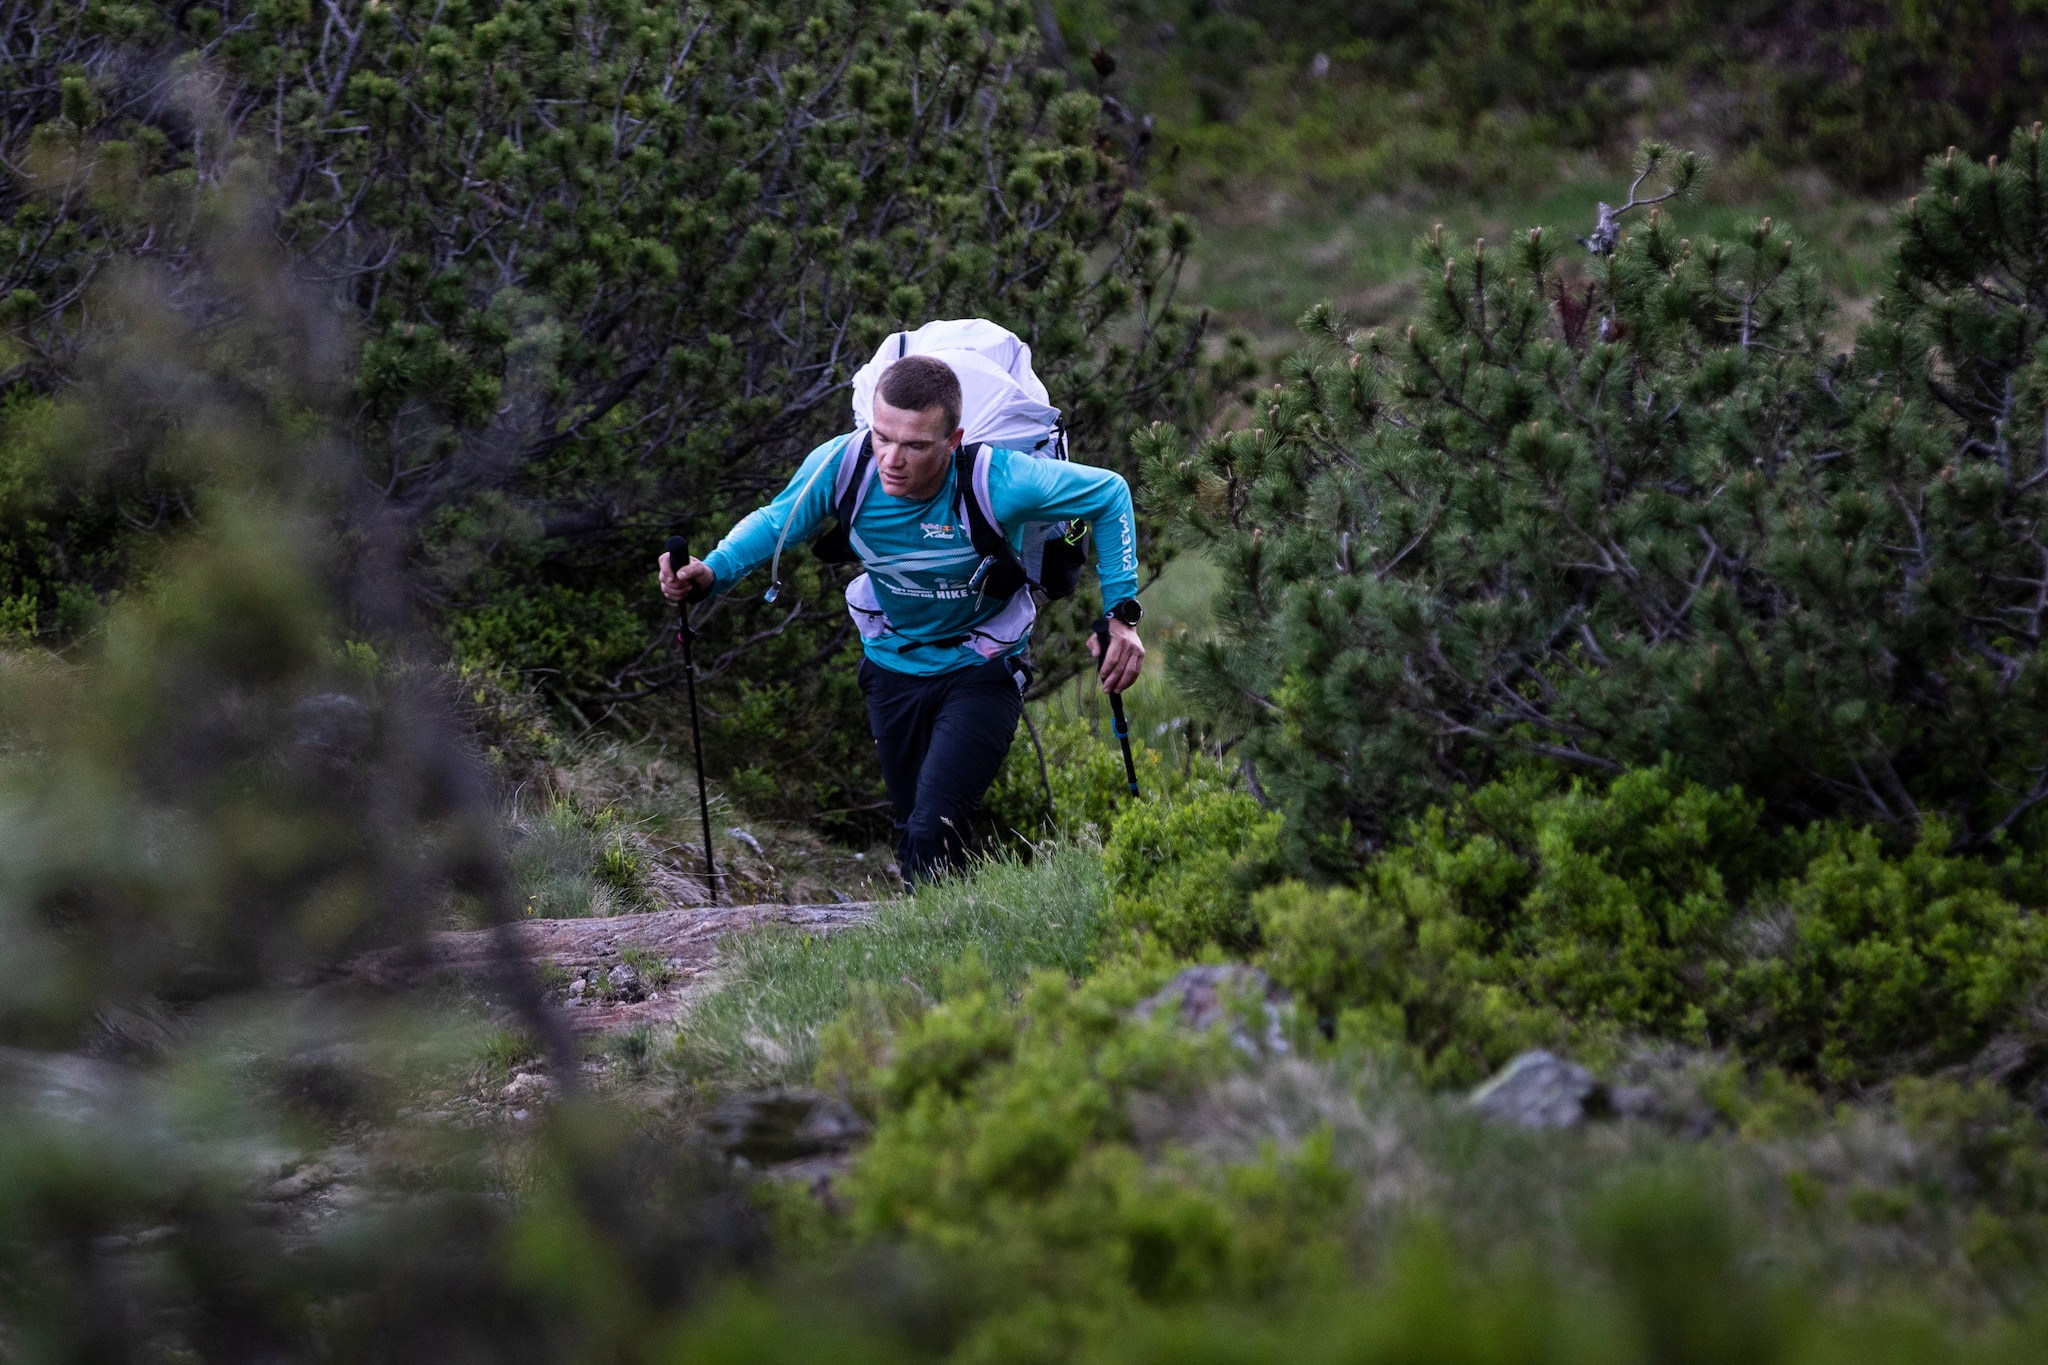 Benoit Outters (FRA1) hikes during the Red Bull X-Alps in Lindlalm, Germany on June 18, 2019